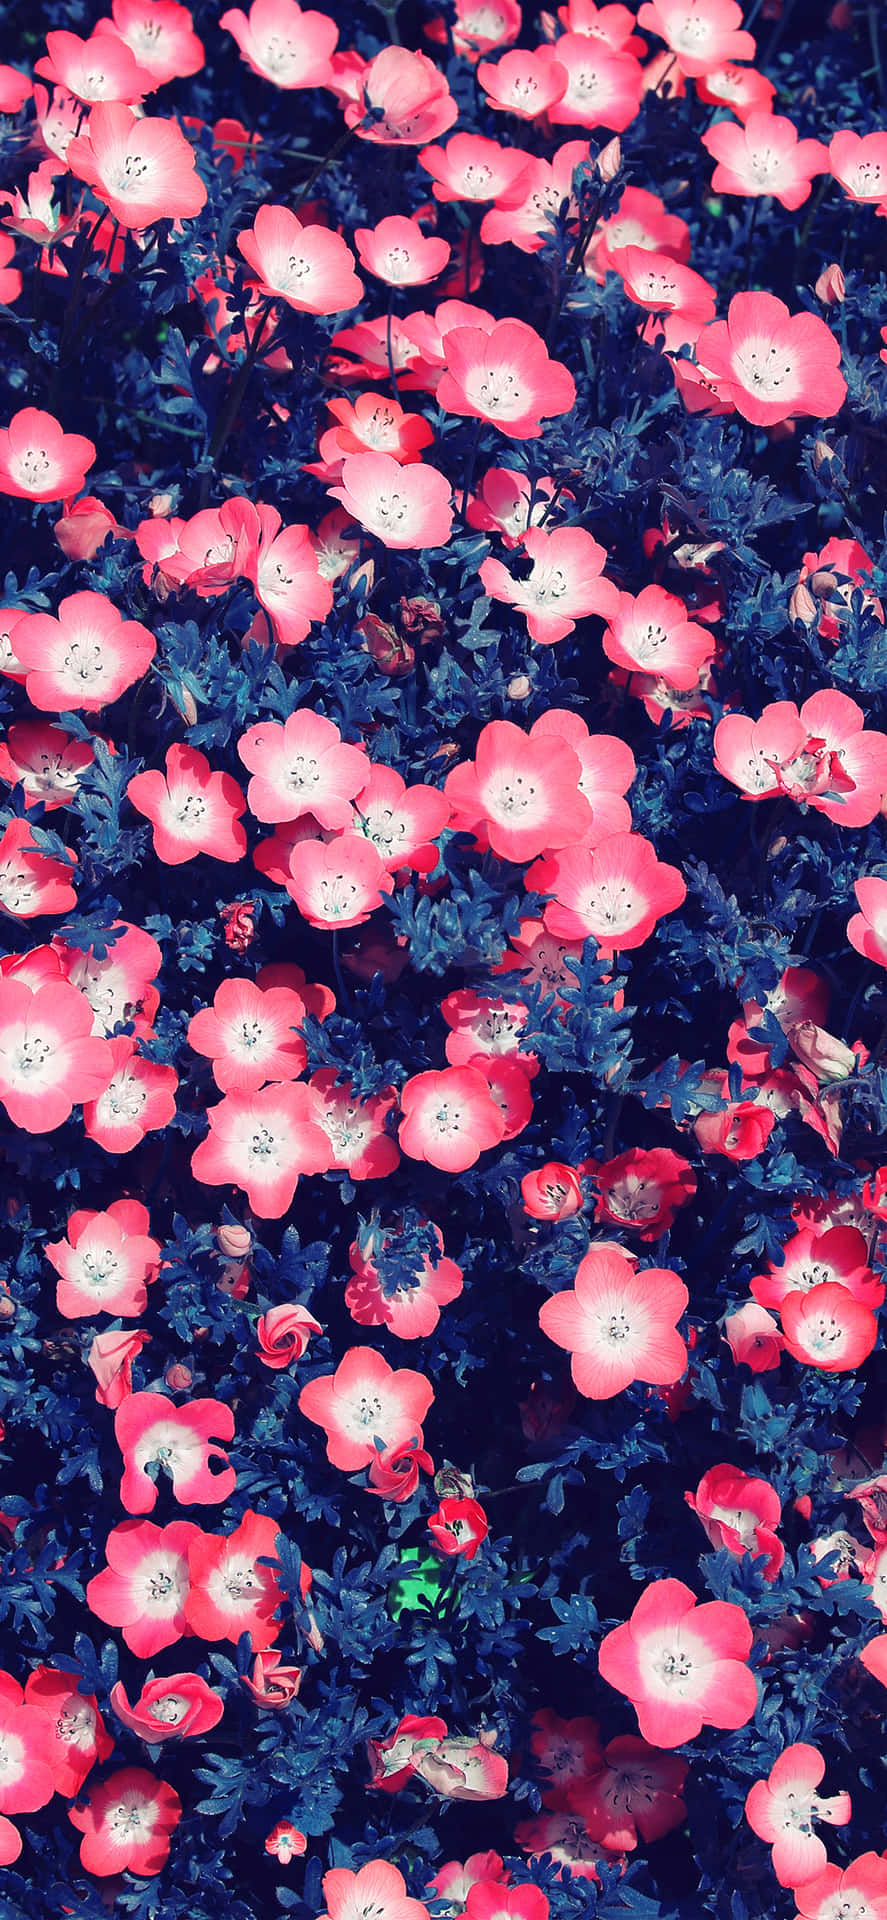 Aesthetic Small Pink Flowers Tumblr Photography Iphone Wallpaper